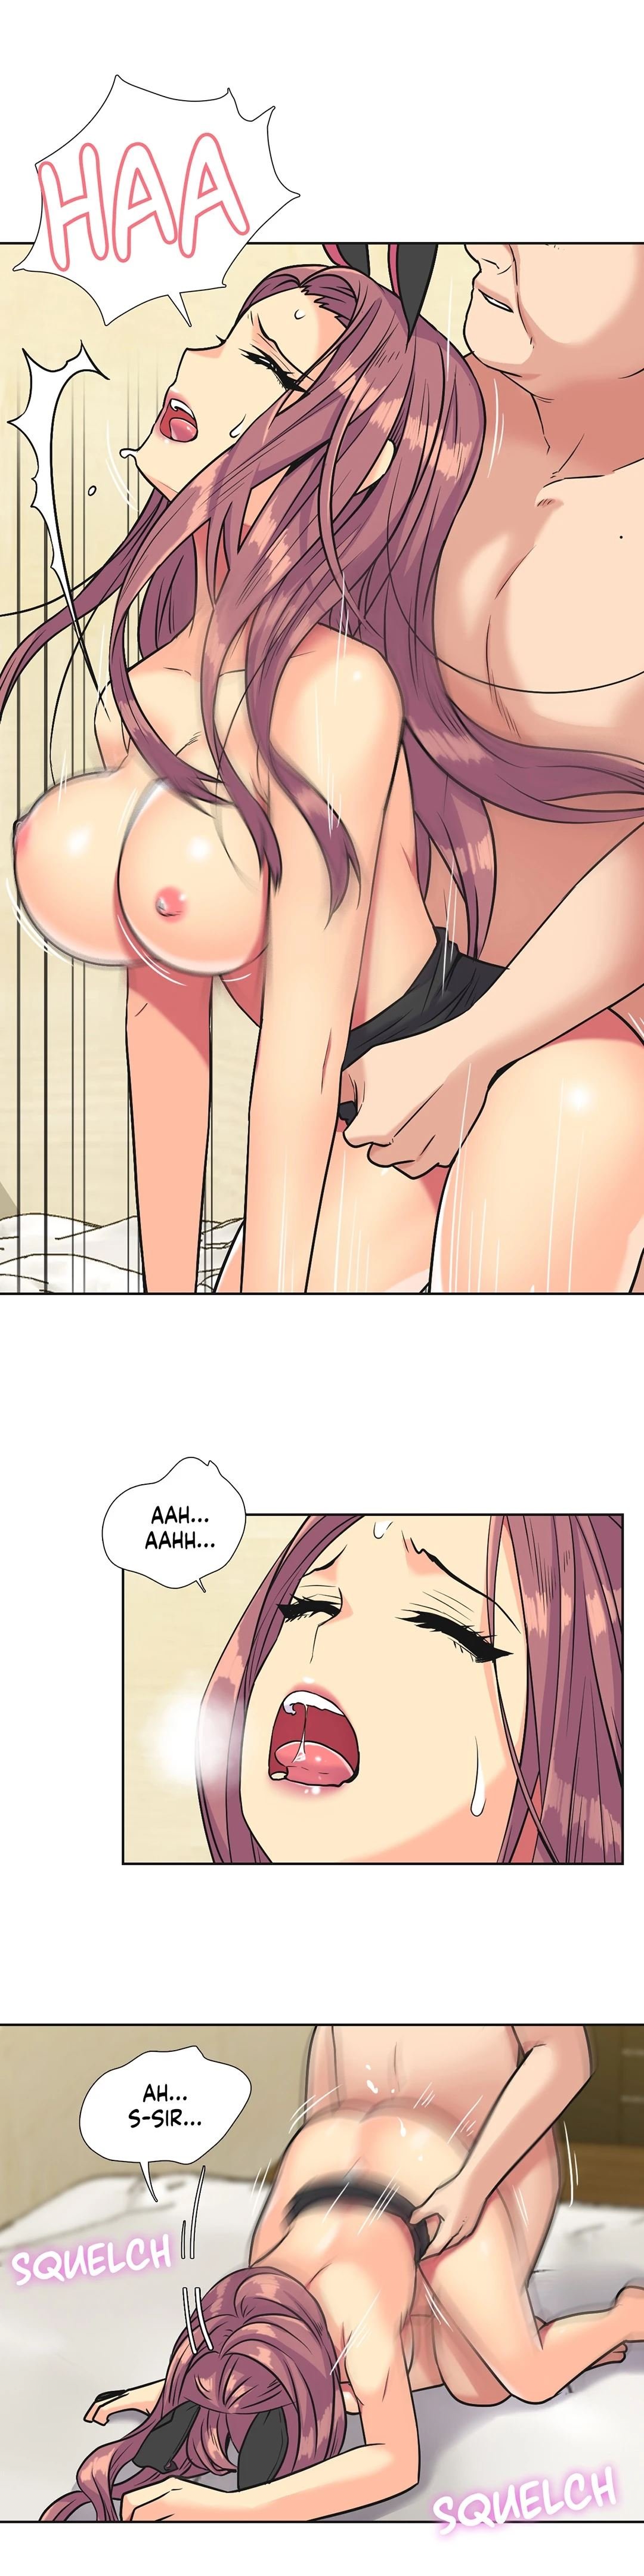 the-yes-girl-chap-34-12